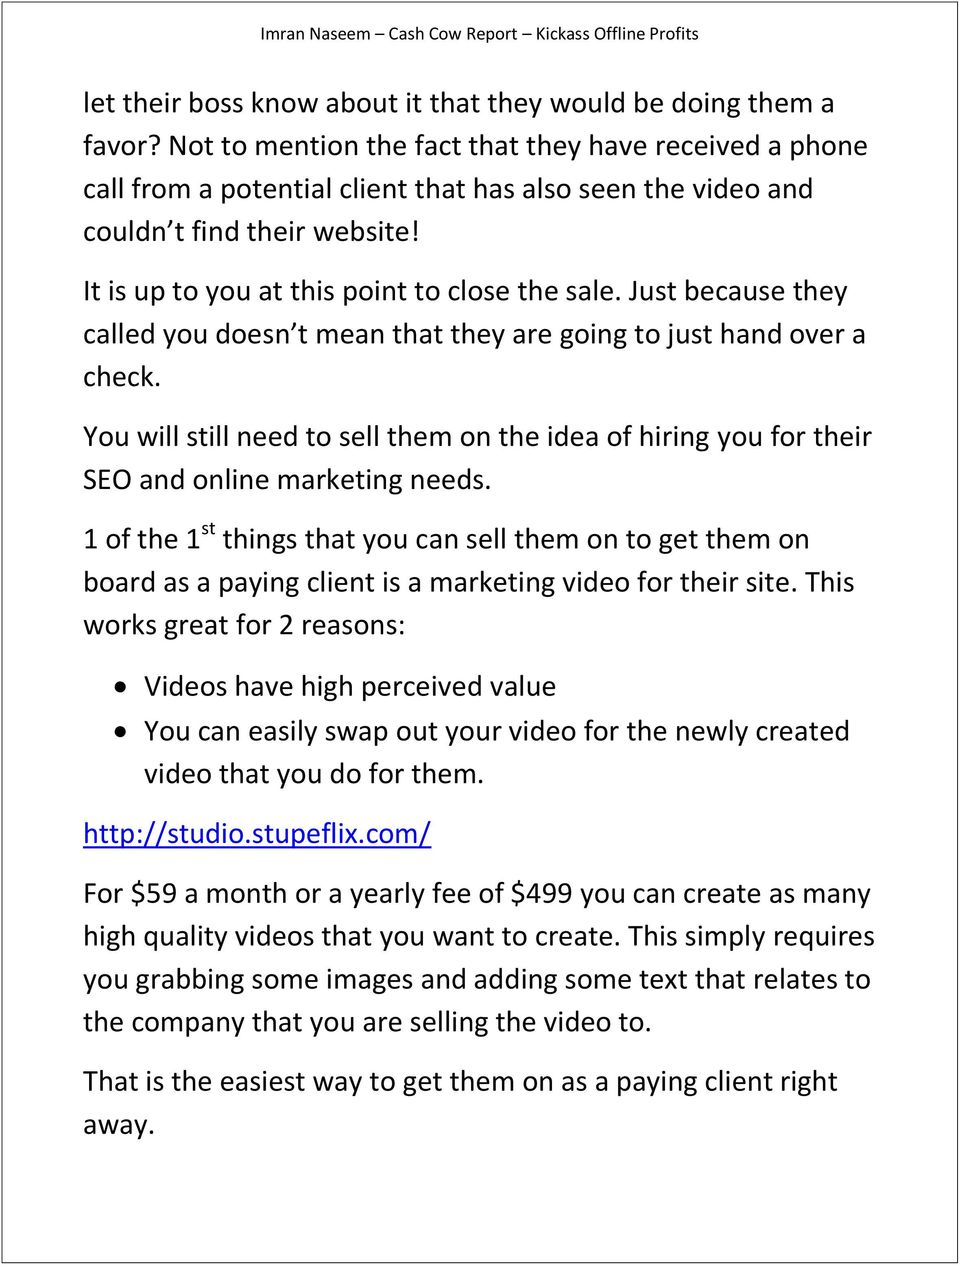 Just because they called you doesn t mean that they are going to just hand over a check. You will still need to sell them on the idea of hiring you for their SEO and online marketing needs.